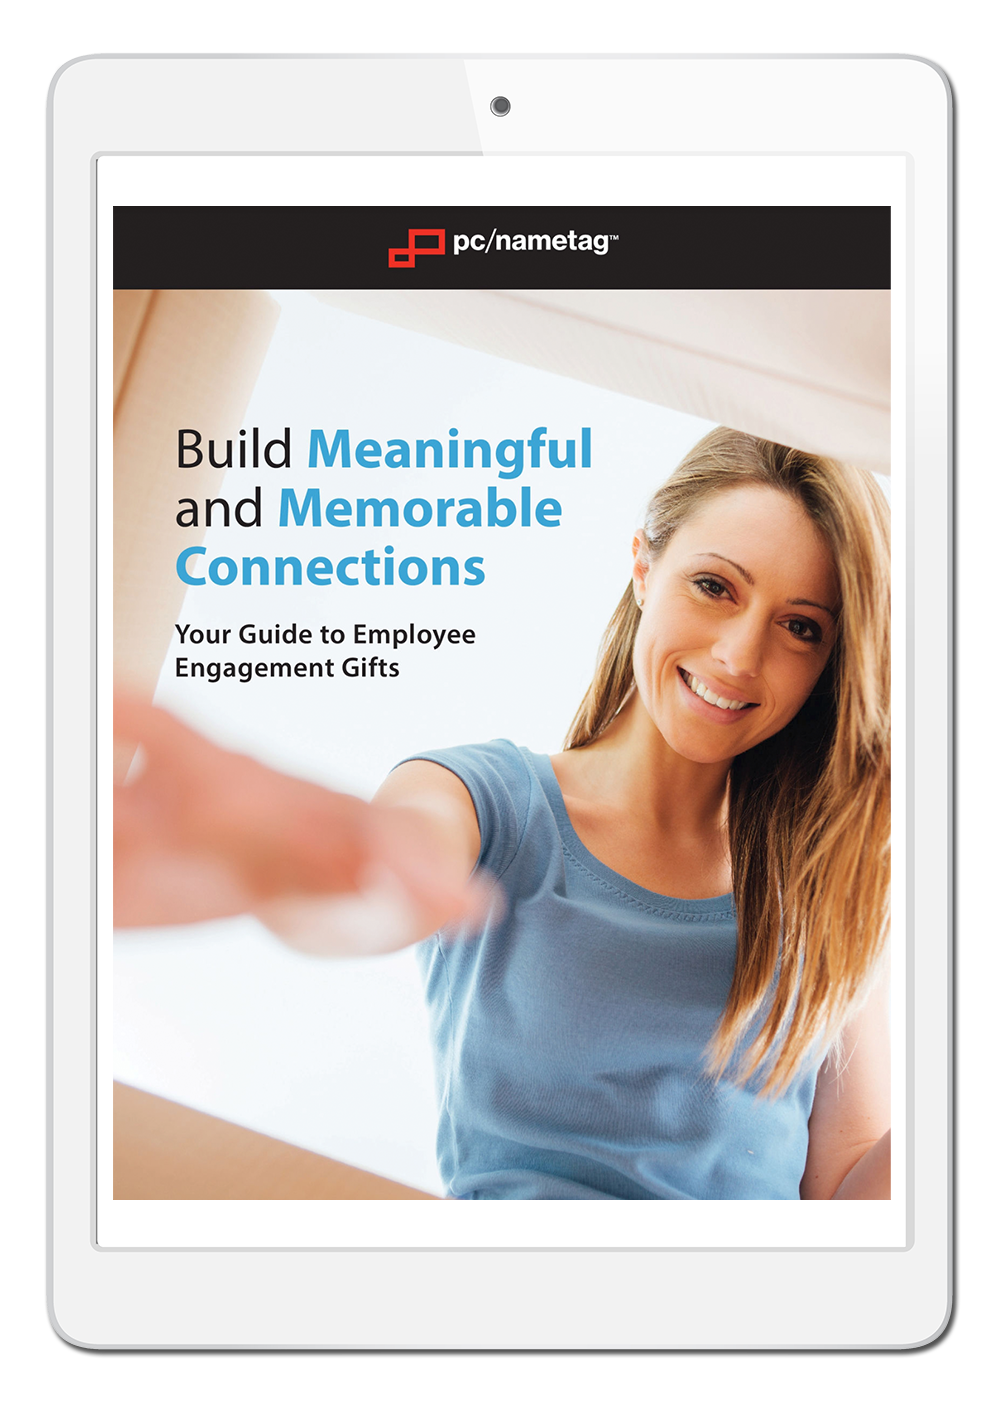 pc/nametag Employee Engagement Gifts Look Book